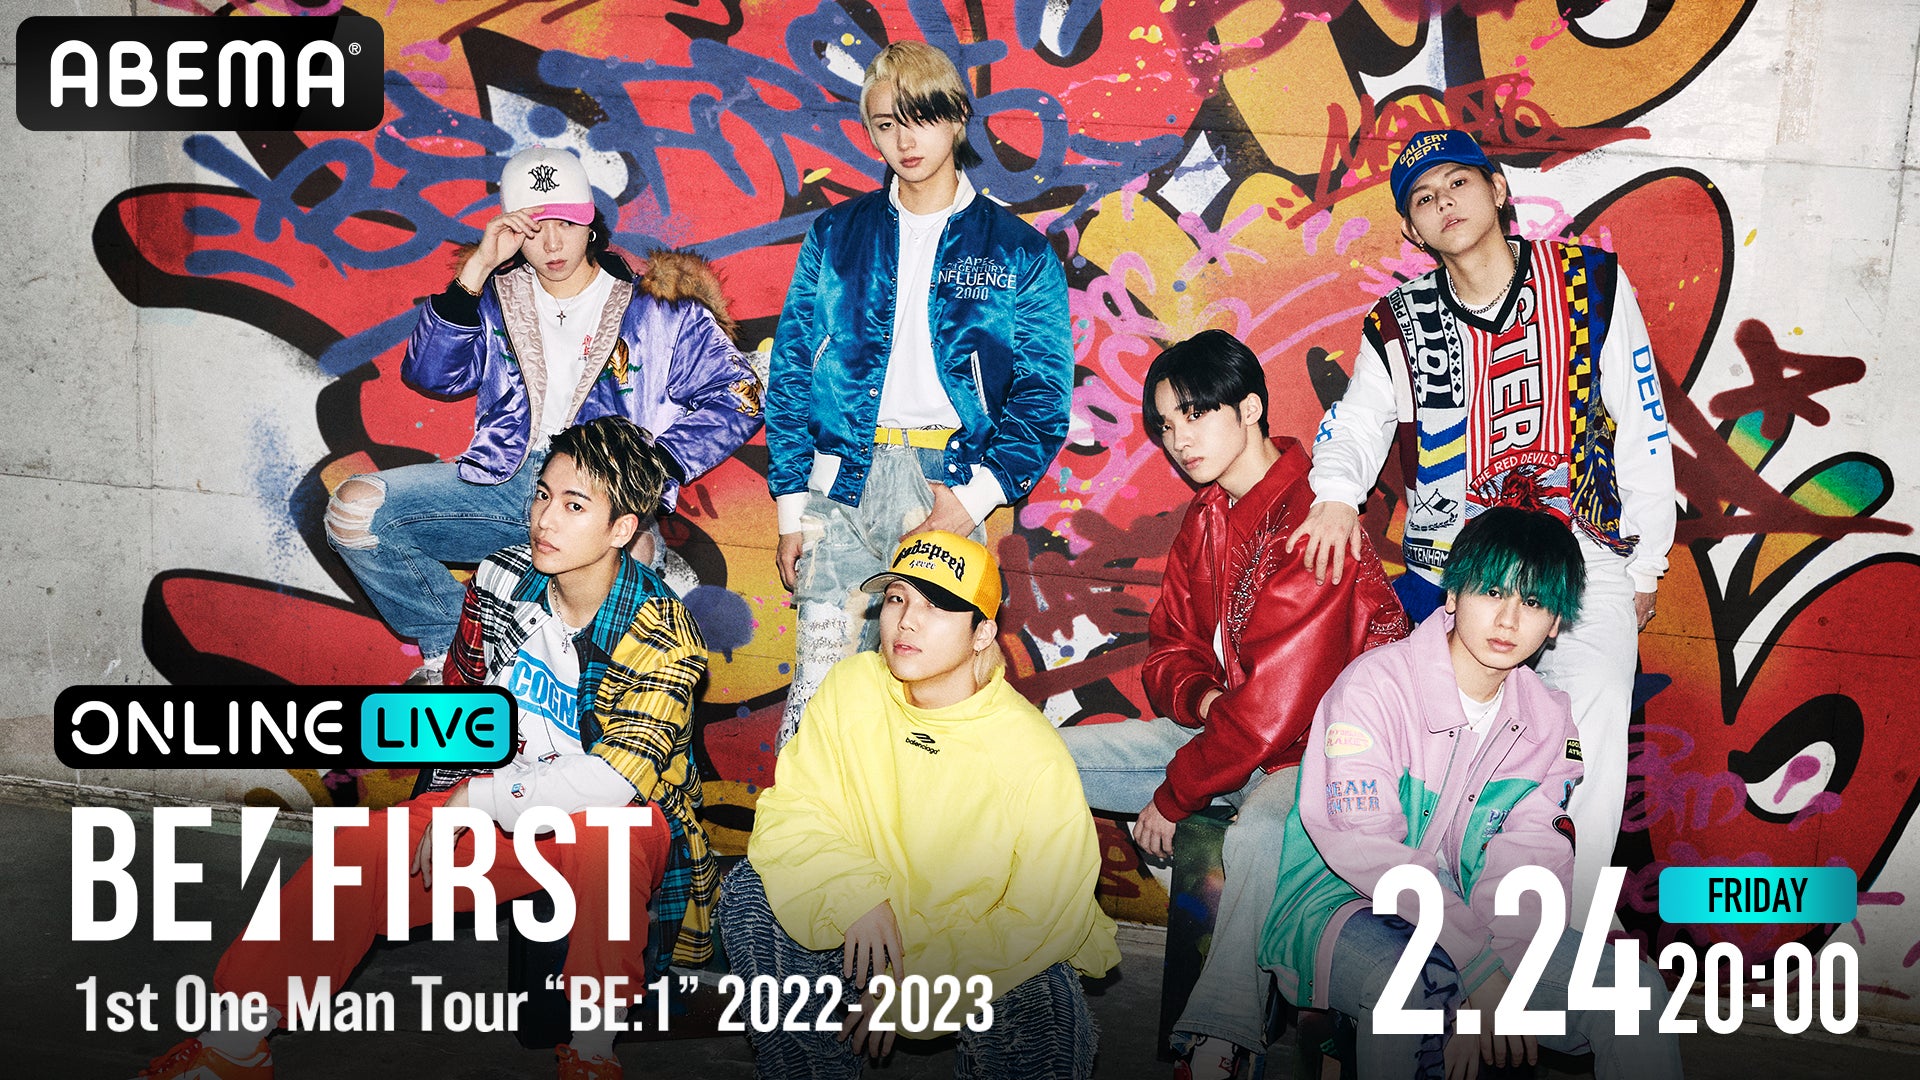 BE:FIRST初の全国ワンマンツアー！『BE:FIRST 1st One Man Tour “BE:1” 2022-2023』のツアーファイナル公演の模様を、U-NEXTにてライブ配信決定！